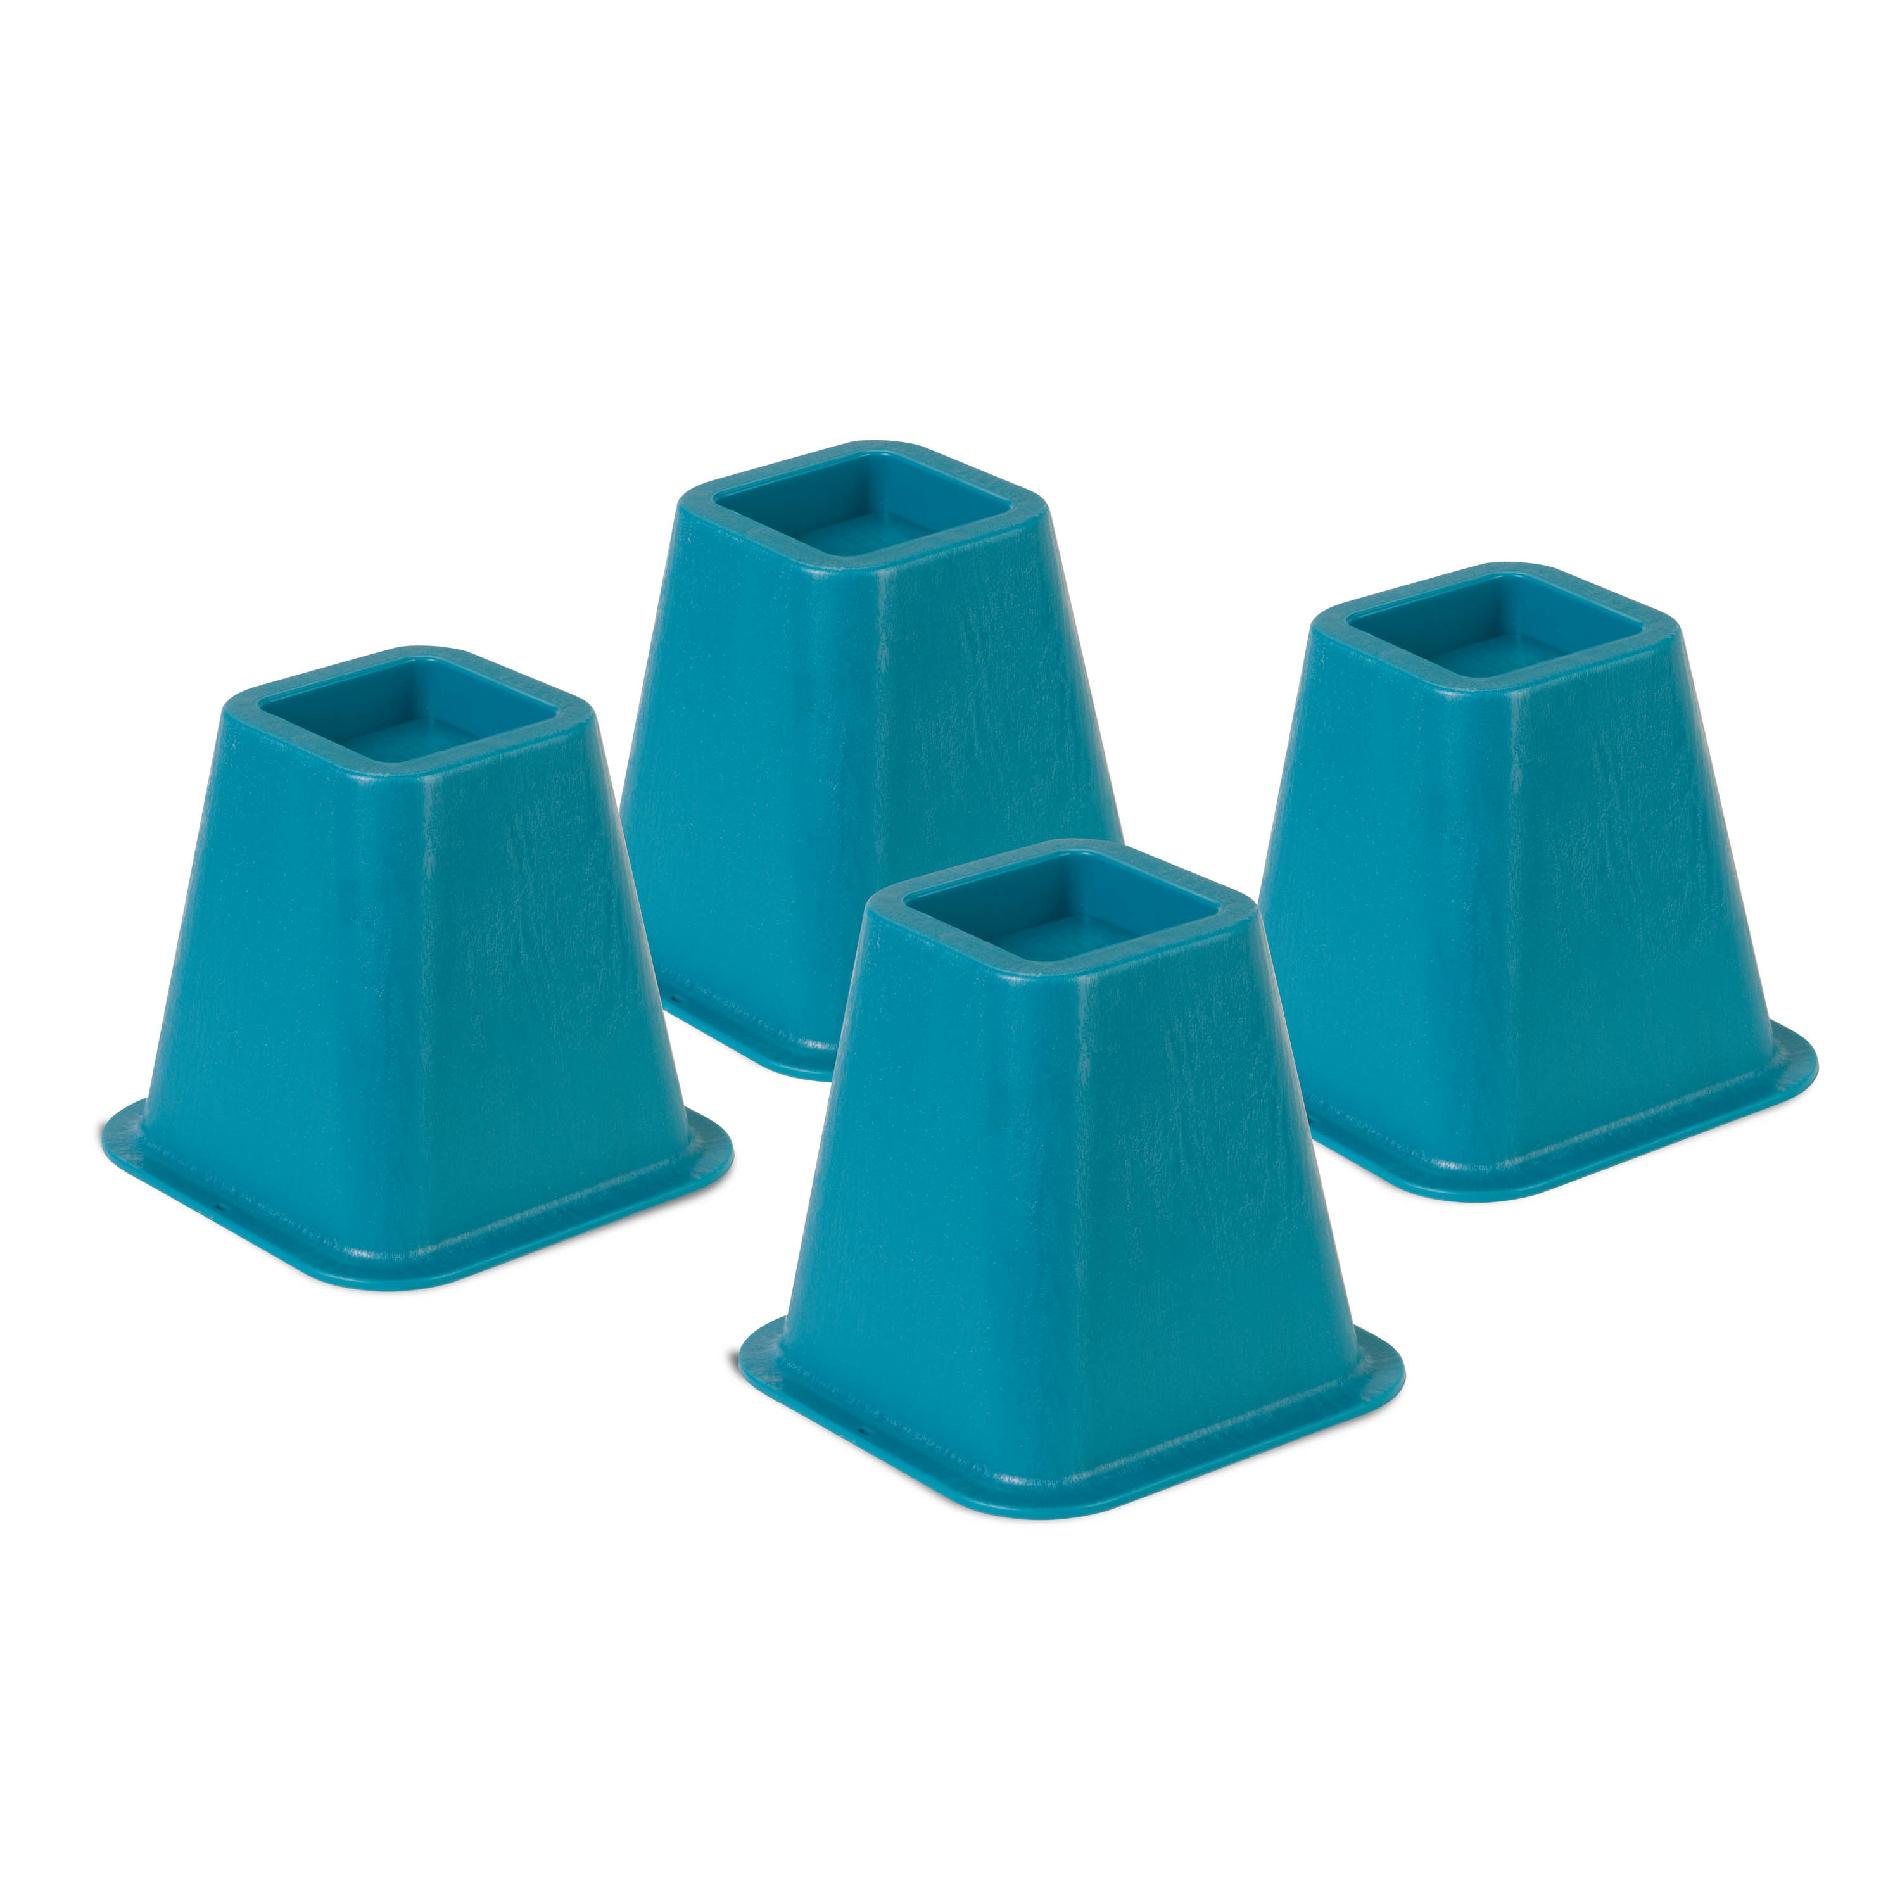 Honey Can Do Bed Risers - 4pk blue